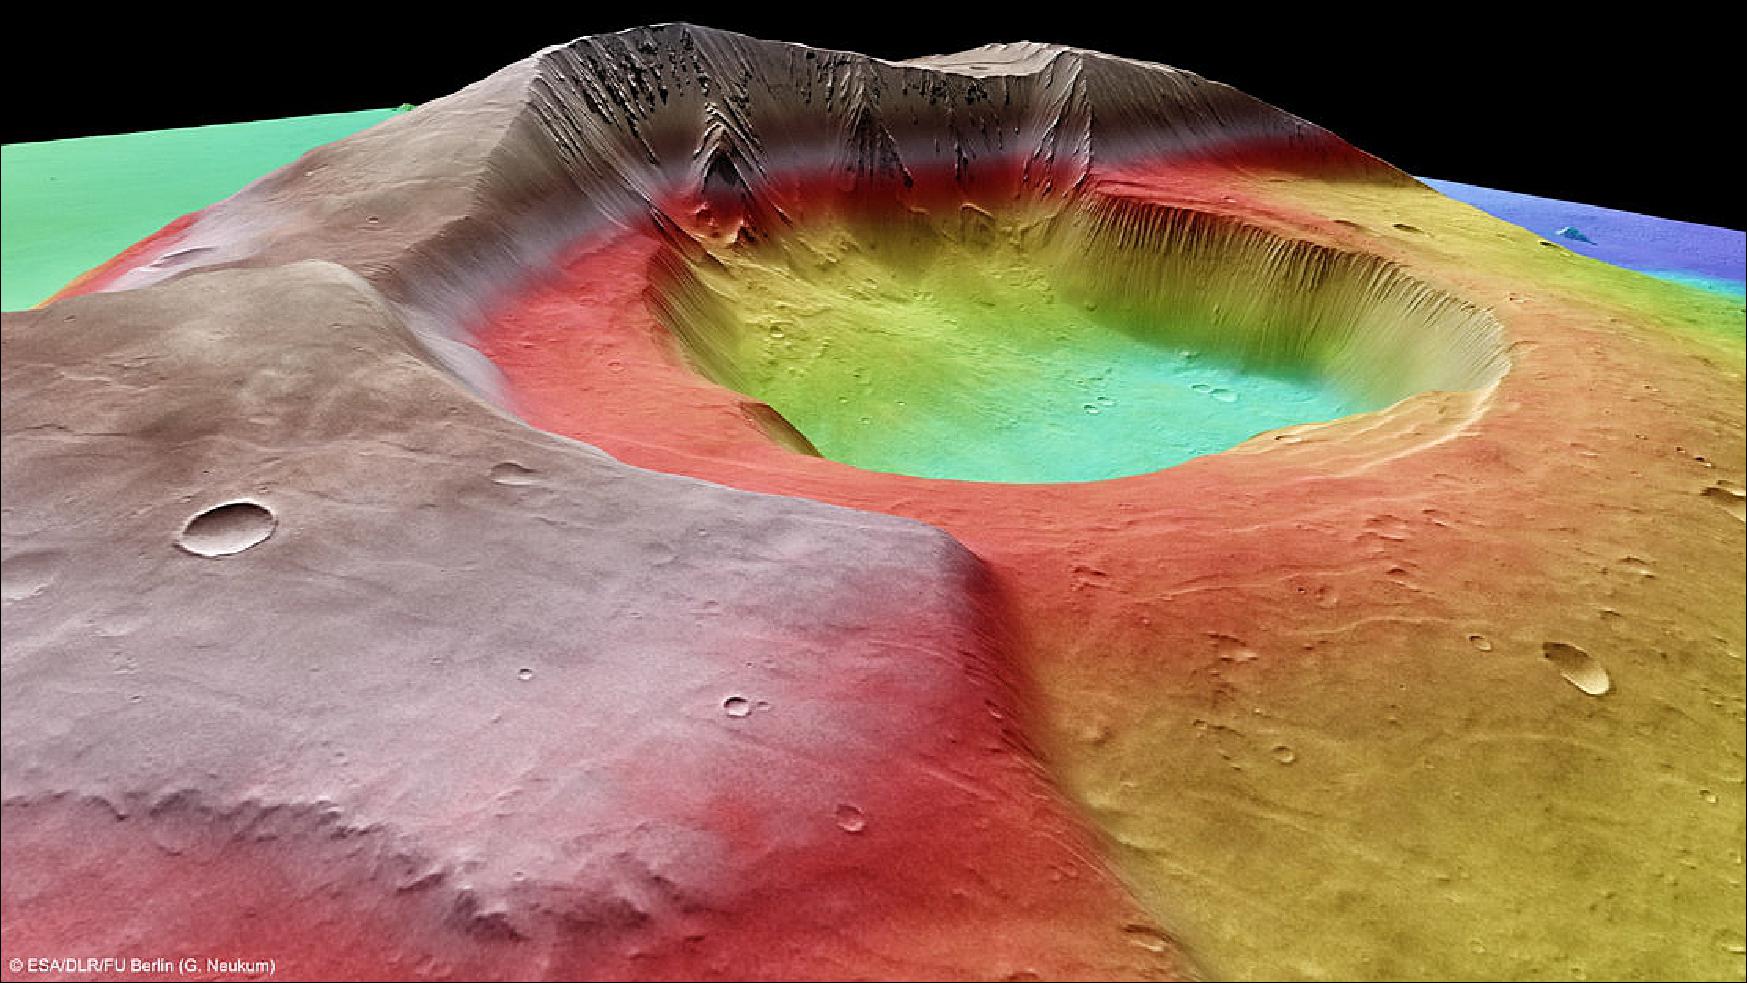 Figure 81: Alternate perspective of Tharsis Tholus. The volcano towers 8 km above the surrounding terrain with a base that stretches 155 x 125 km and a central caldera measuring 32 x 34 km. The image was created using a Digital Terrain Model (DTM) obtained from the HRSC on ESA’s Mars Express spacecraft. Elevation data from the DTM is color coded: purple indicates the lowest lying regions and beige the highest. The scale is in meters. In these images, the relief has been exaggerated by a factor of three (image credit: ESA/DLR/FU Berlin (G. Neukum), CC BY-SA 3.0 IGO, Ref. 40)